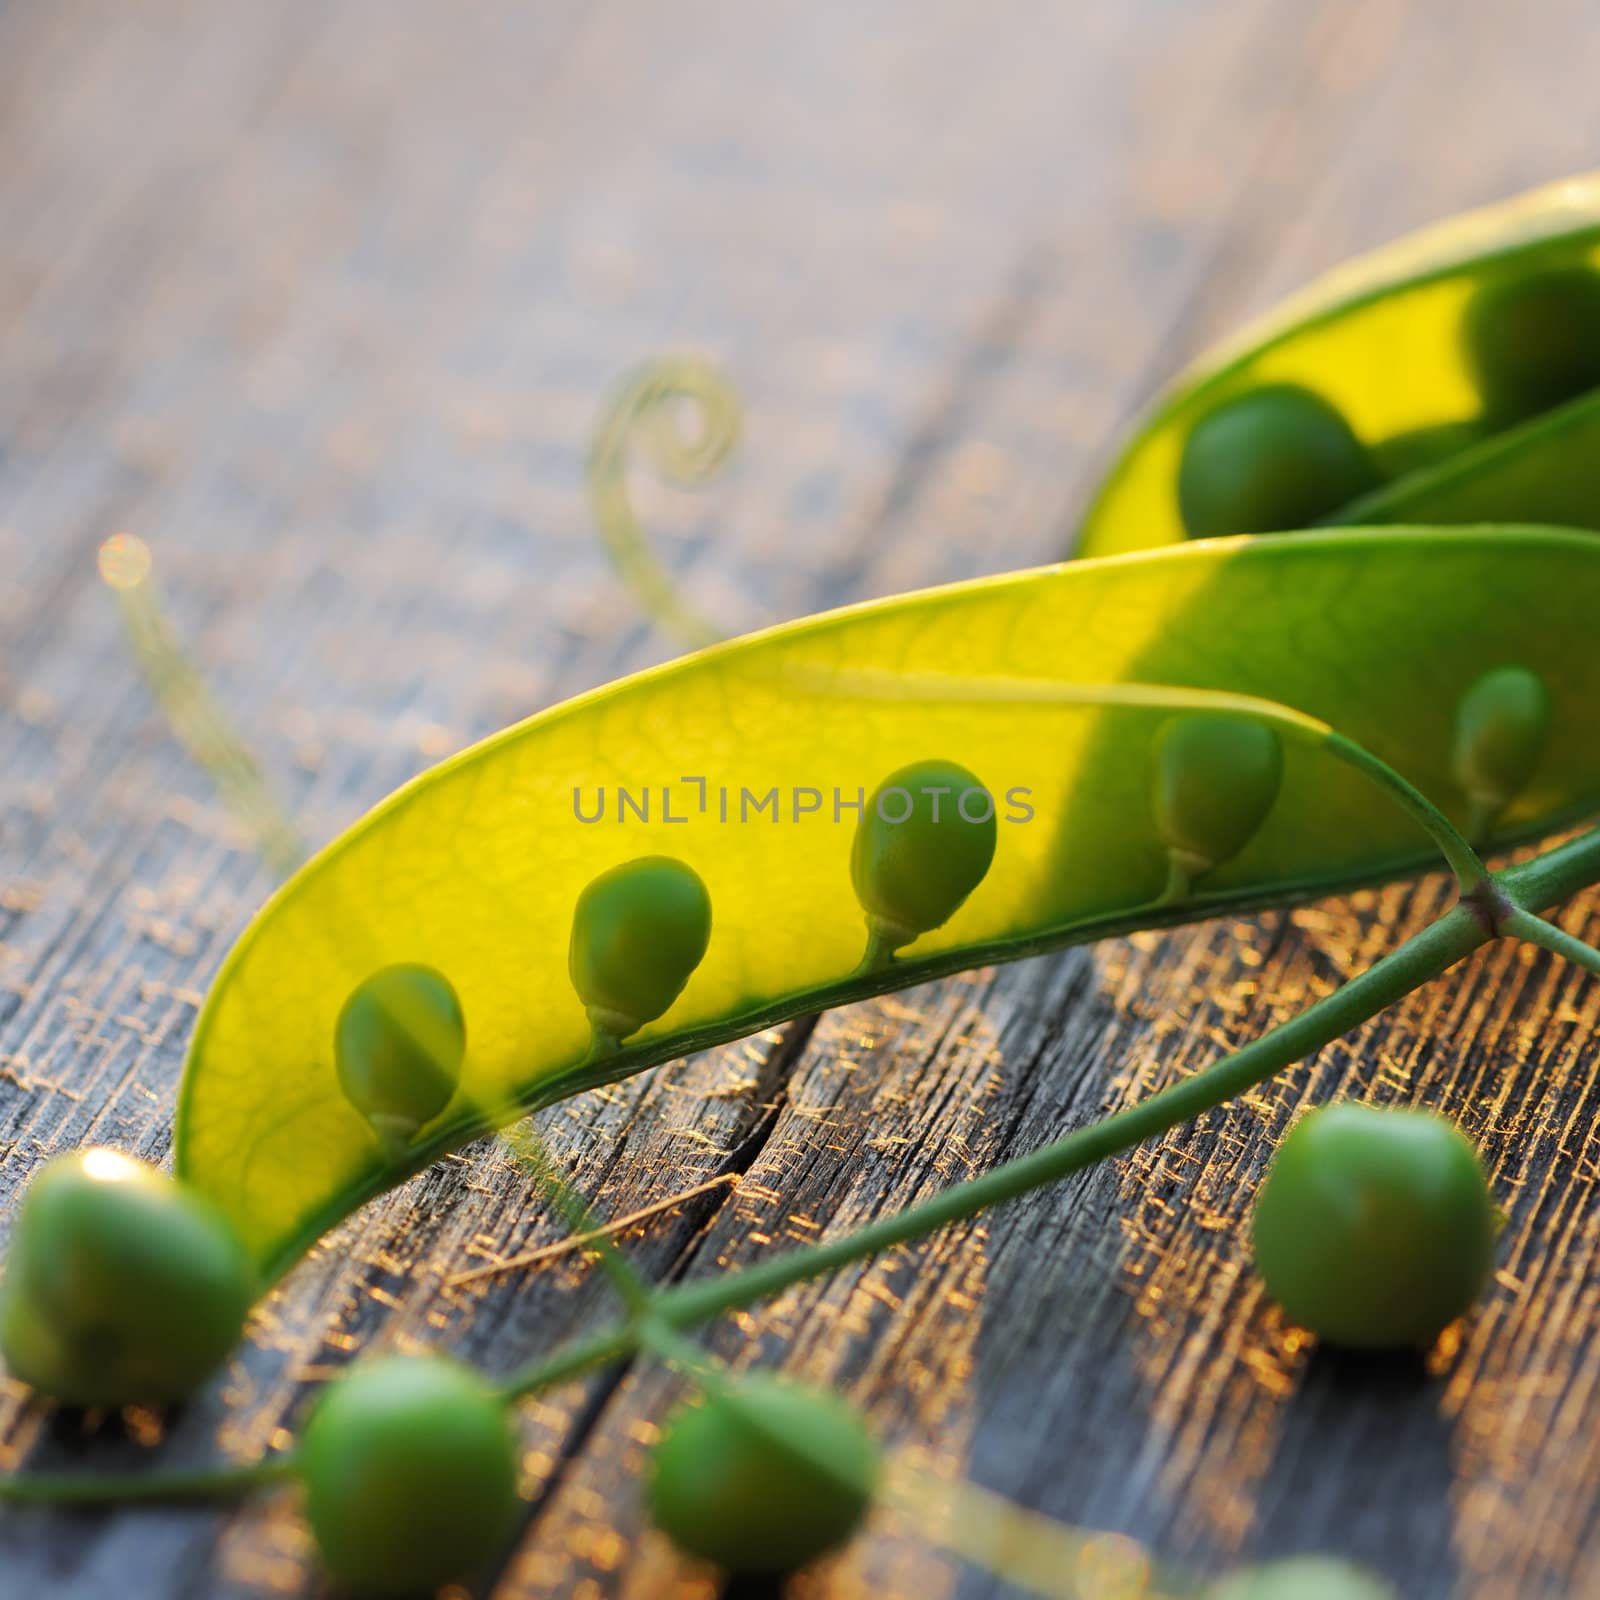 Fresh green peas pods on a wooden table